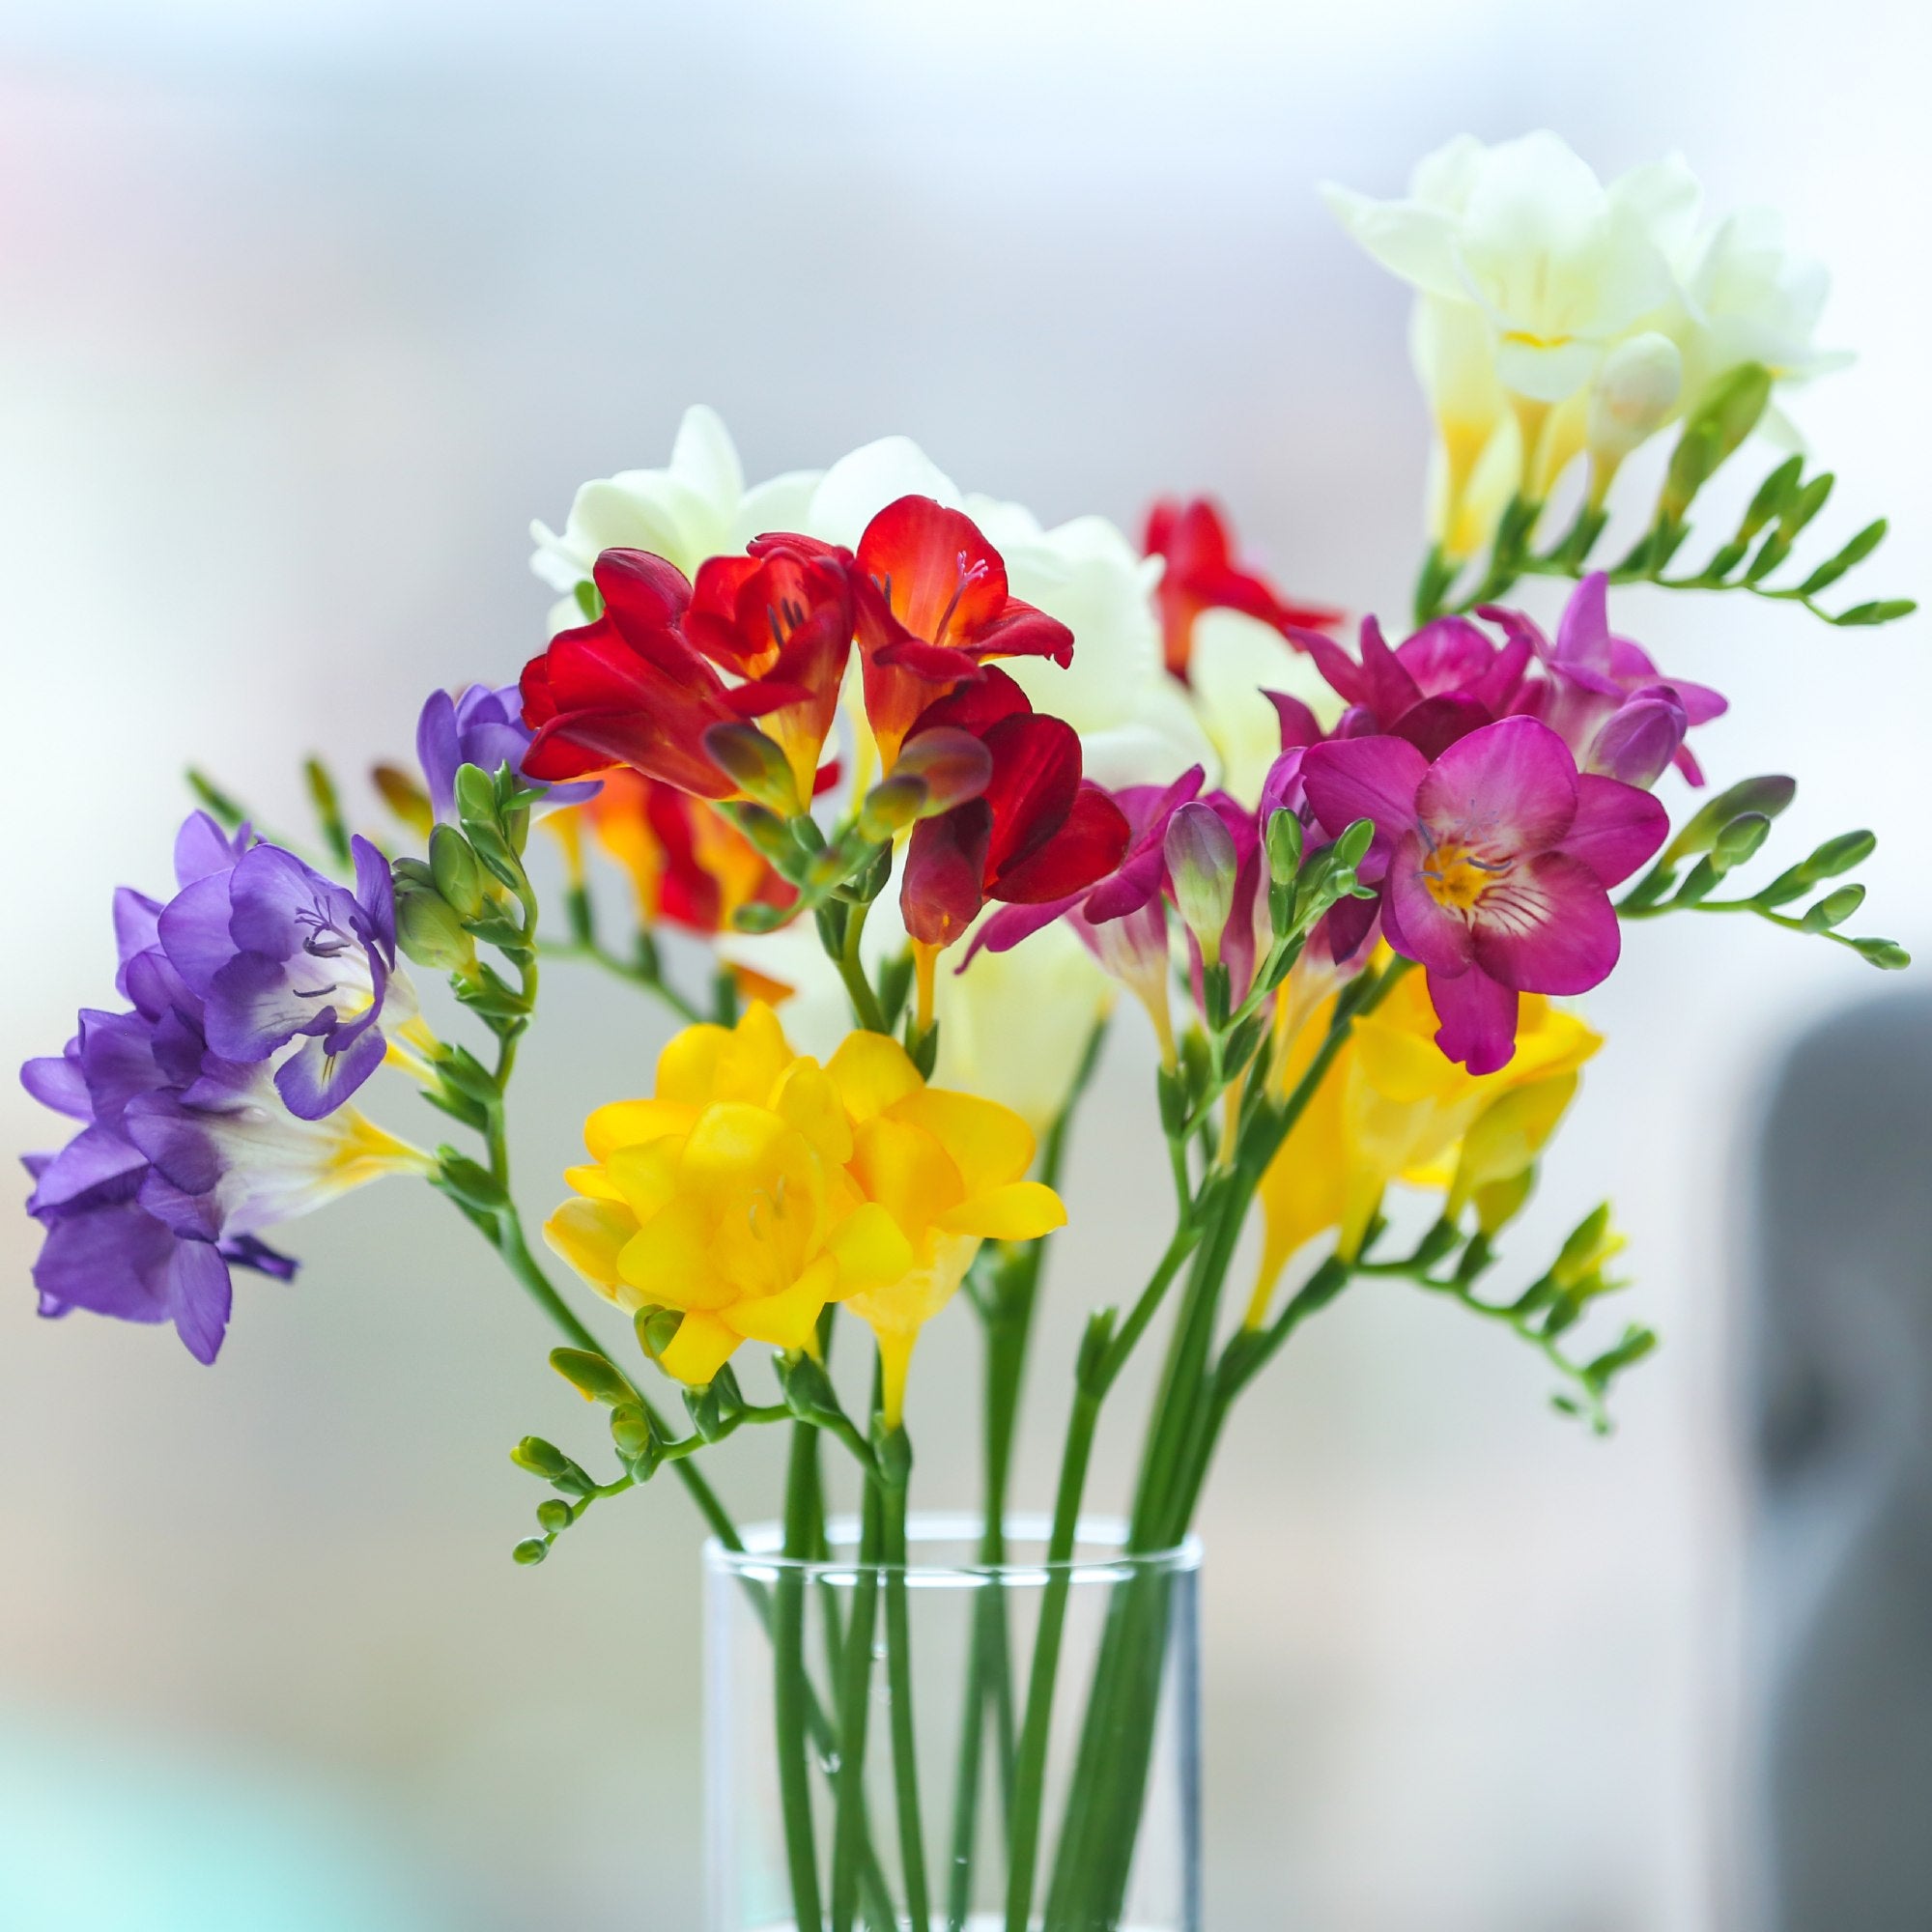 Fragrant And Colorful Freesia Bulbs For Sale Online Singles Mix Easy